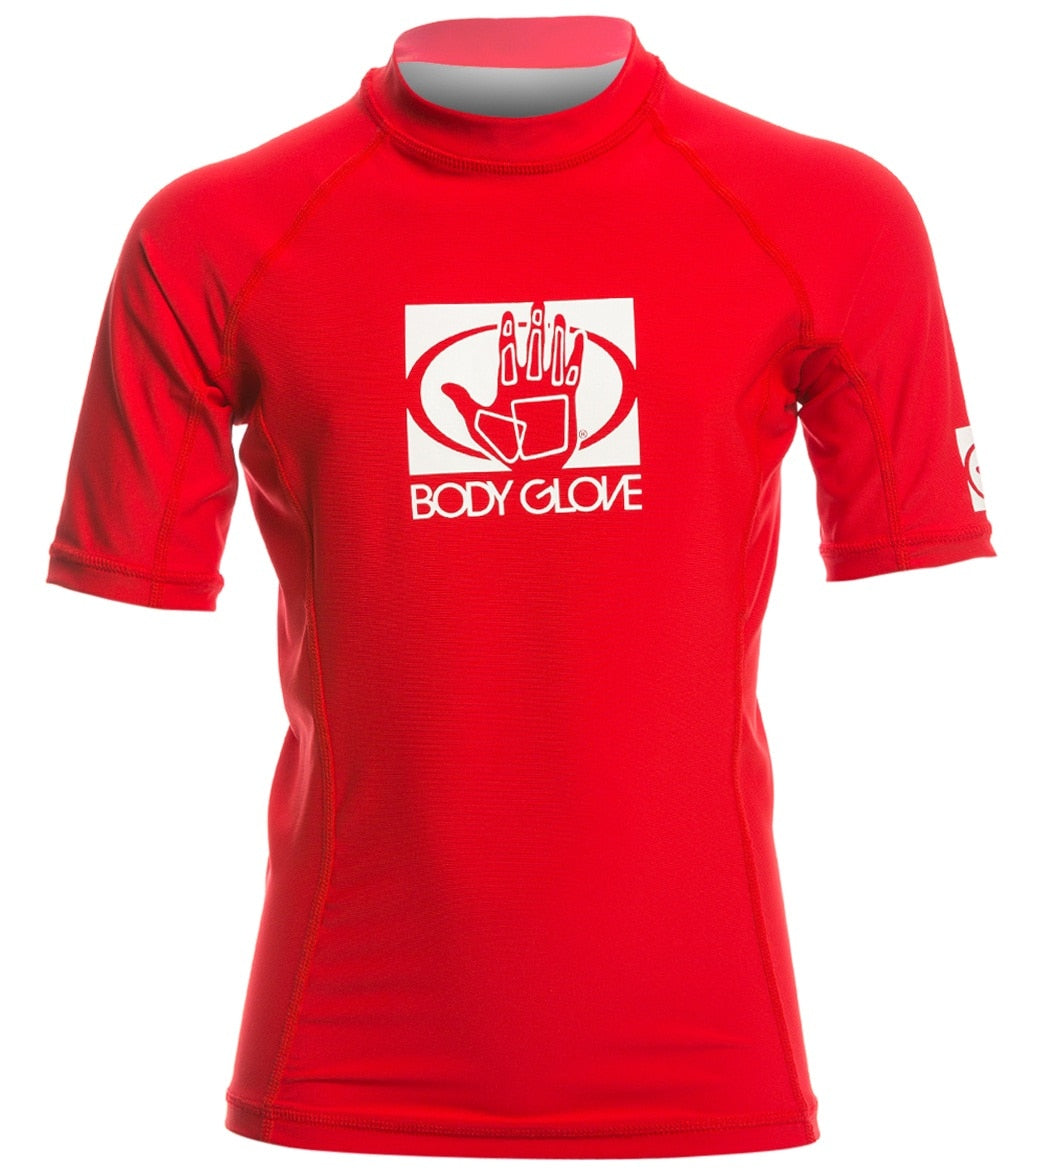 Body Glove Basic Youth Fitted Short Sleeve Rashguard - Red 14 Spandex - Swimoutlet.com